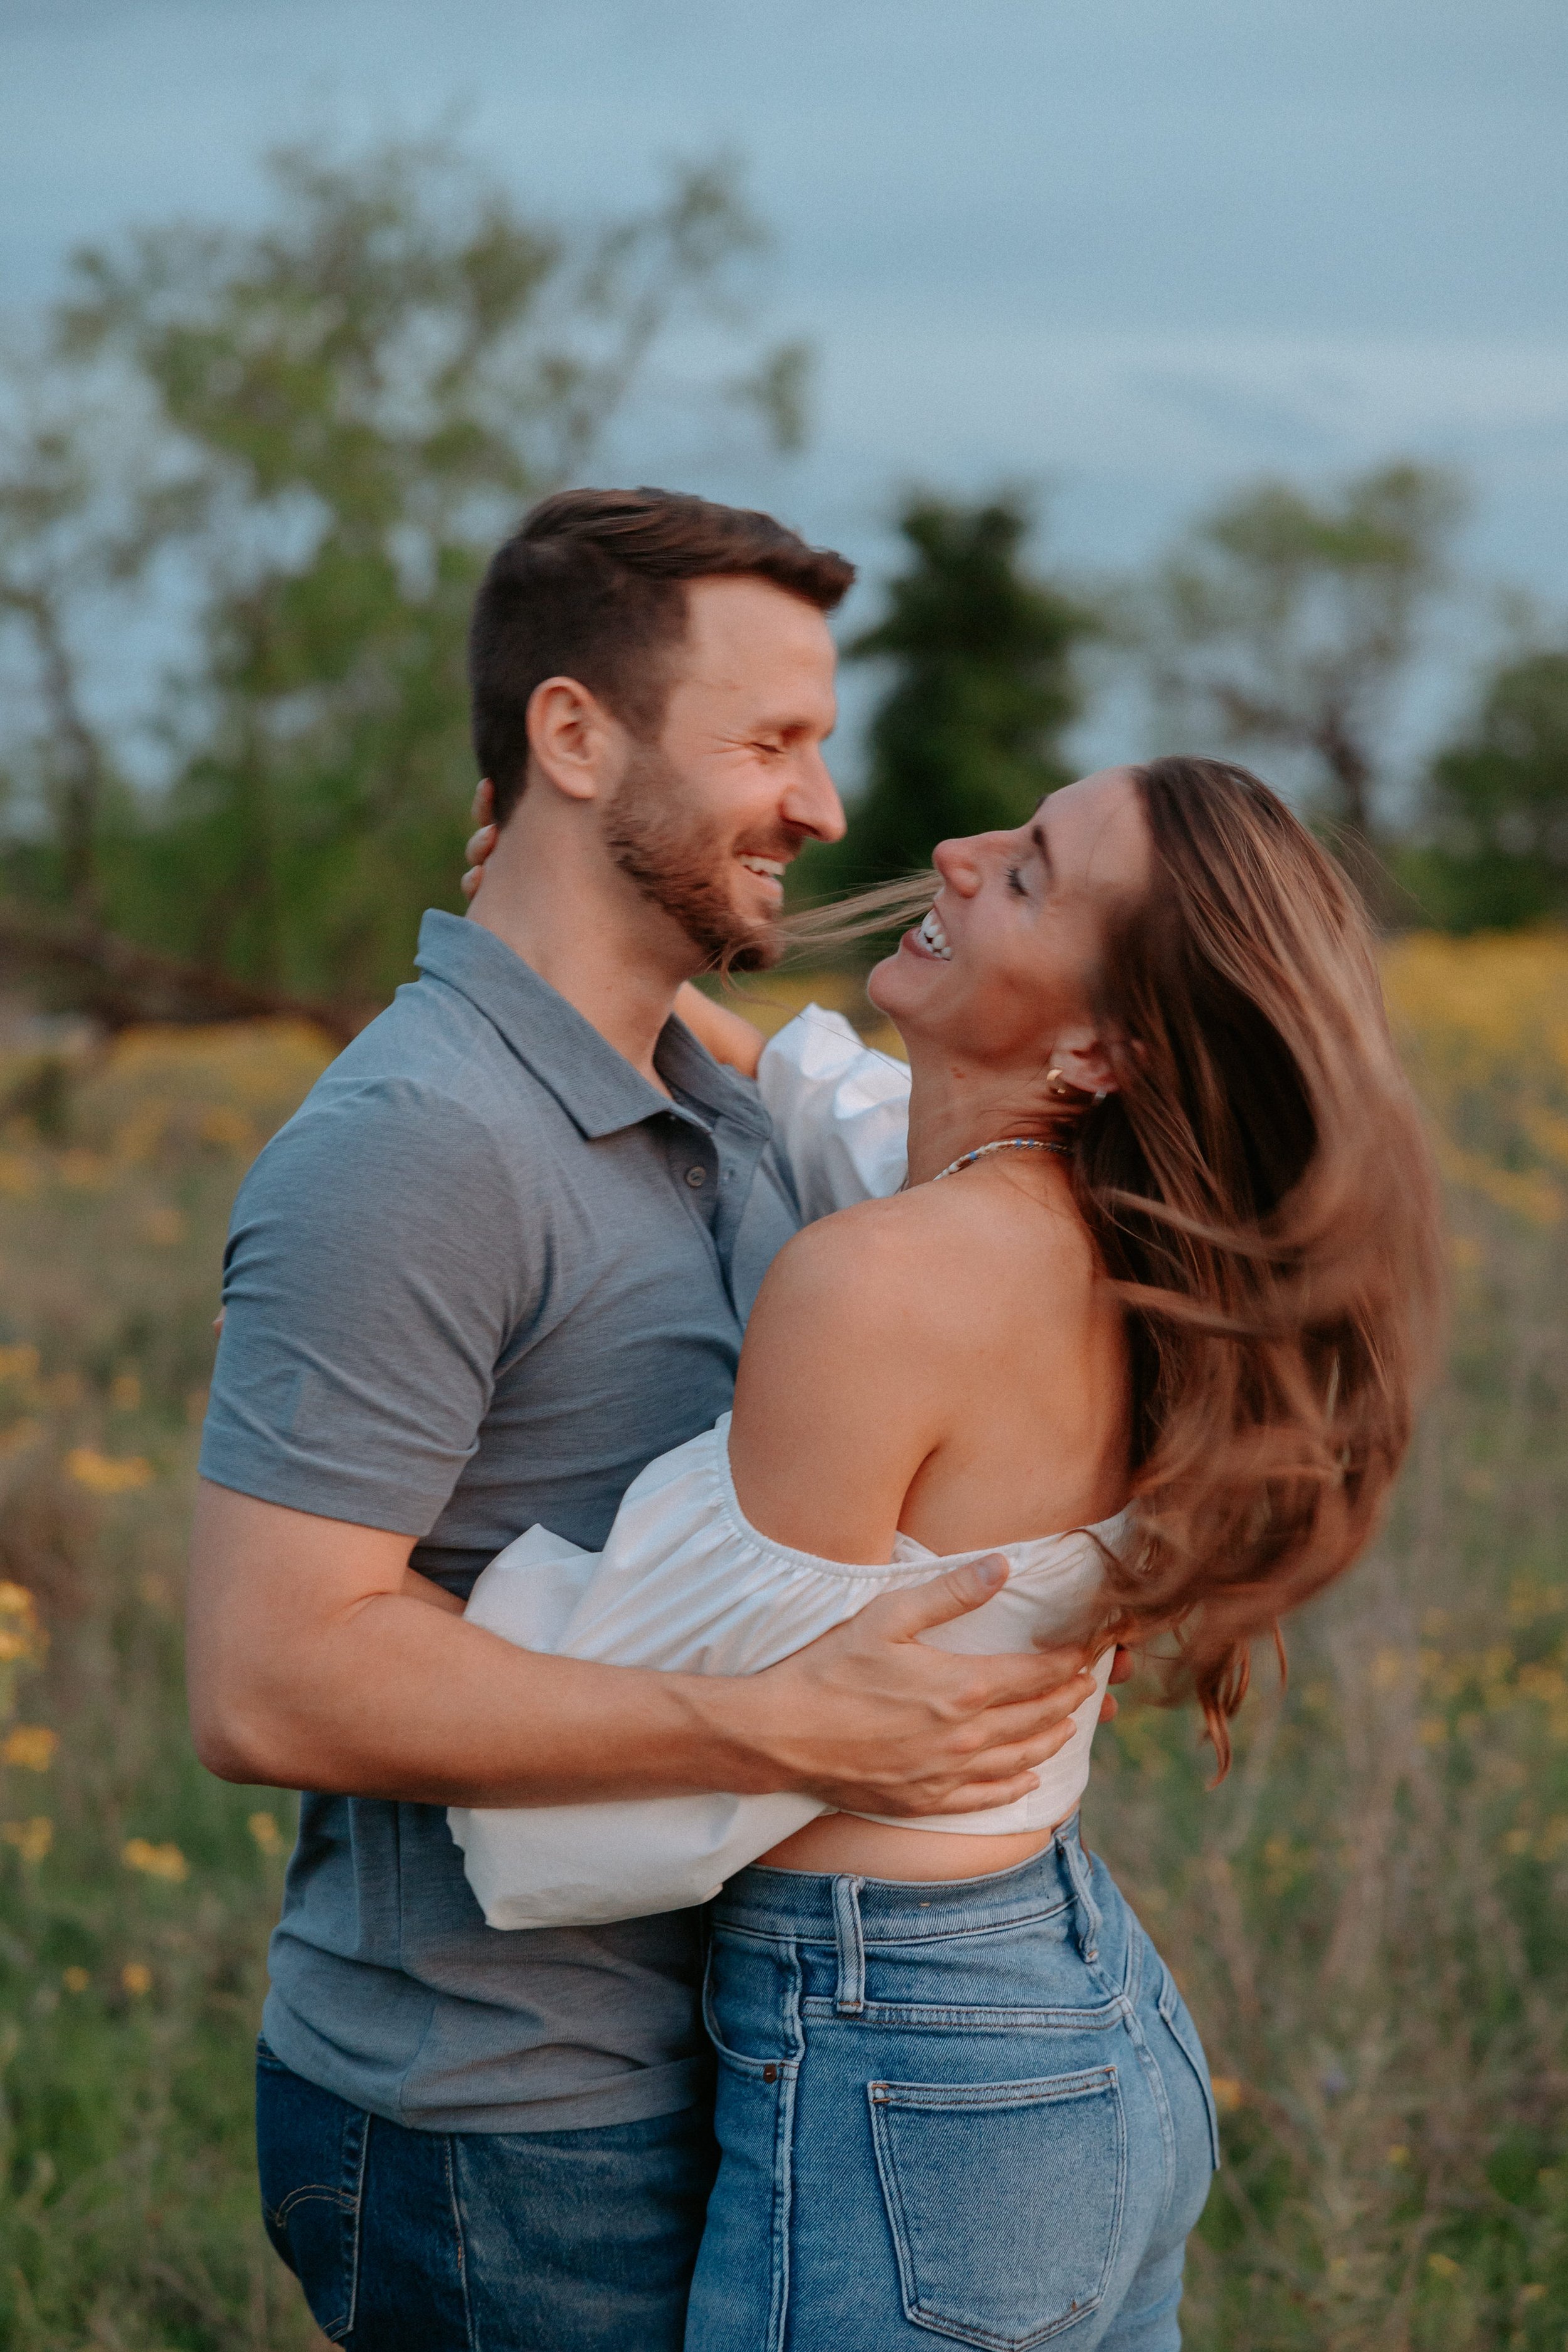 Man laughs with a woman in a field.